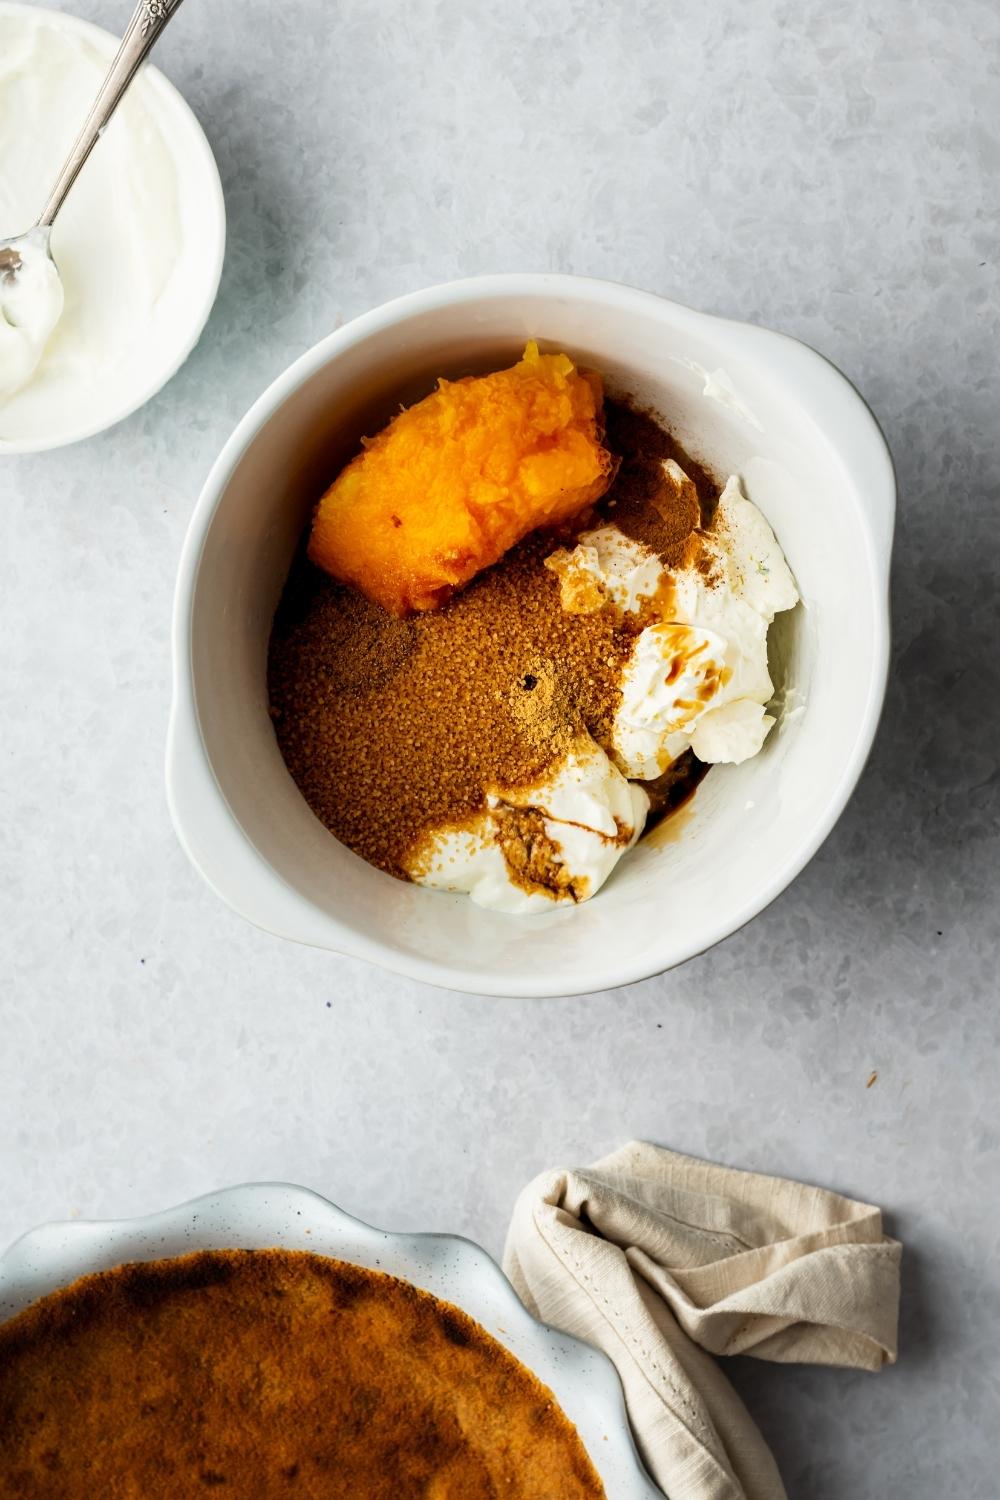 Pumpkin puree, brown sugar, cream cheese, and other ingredients in a white bowl.